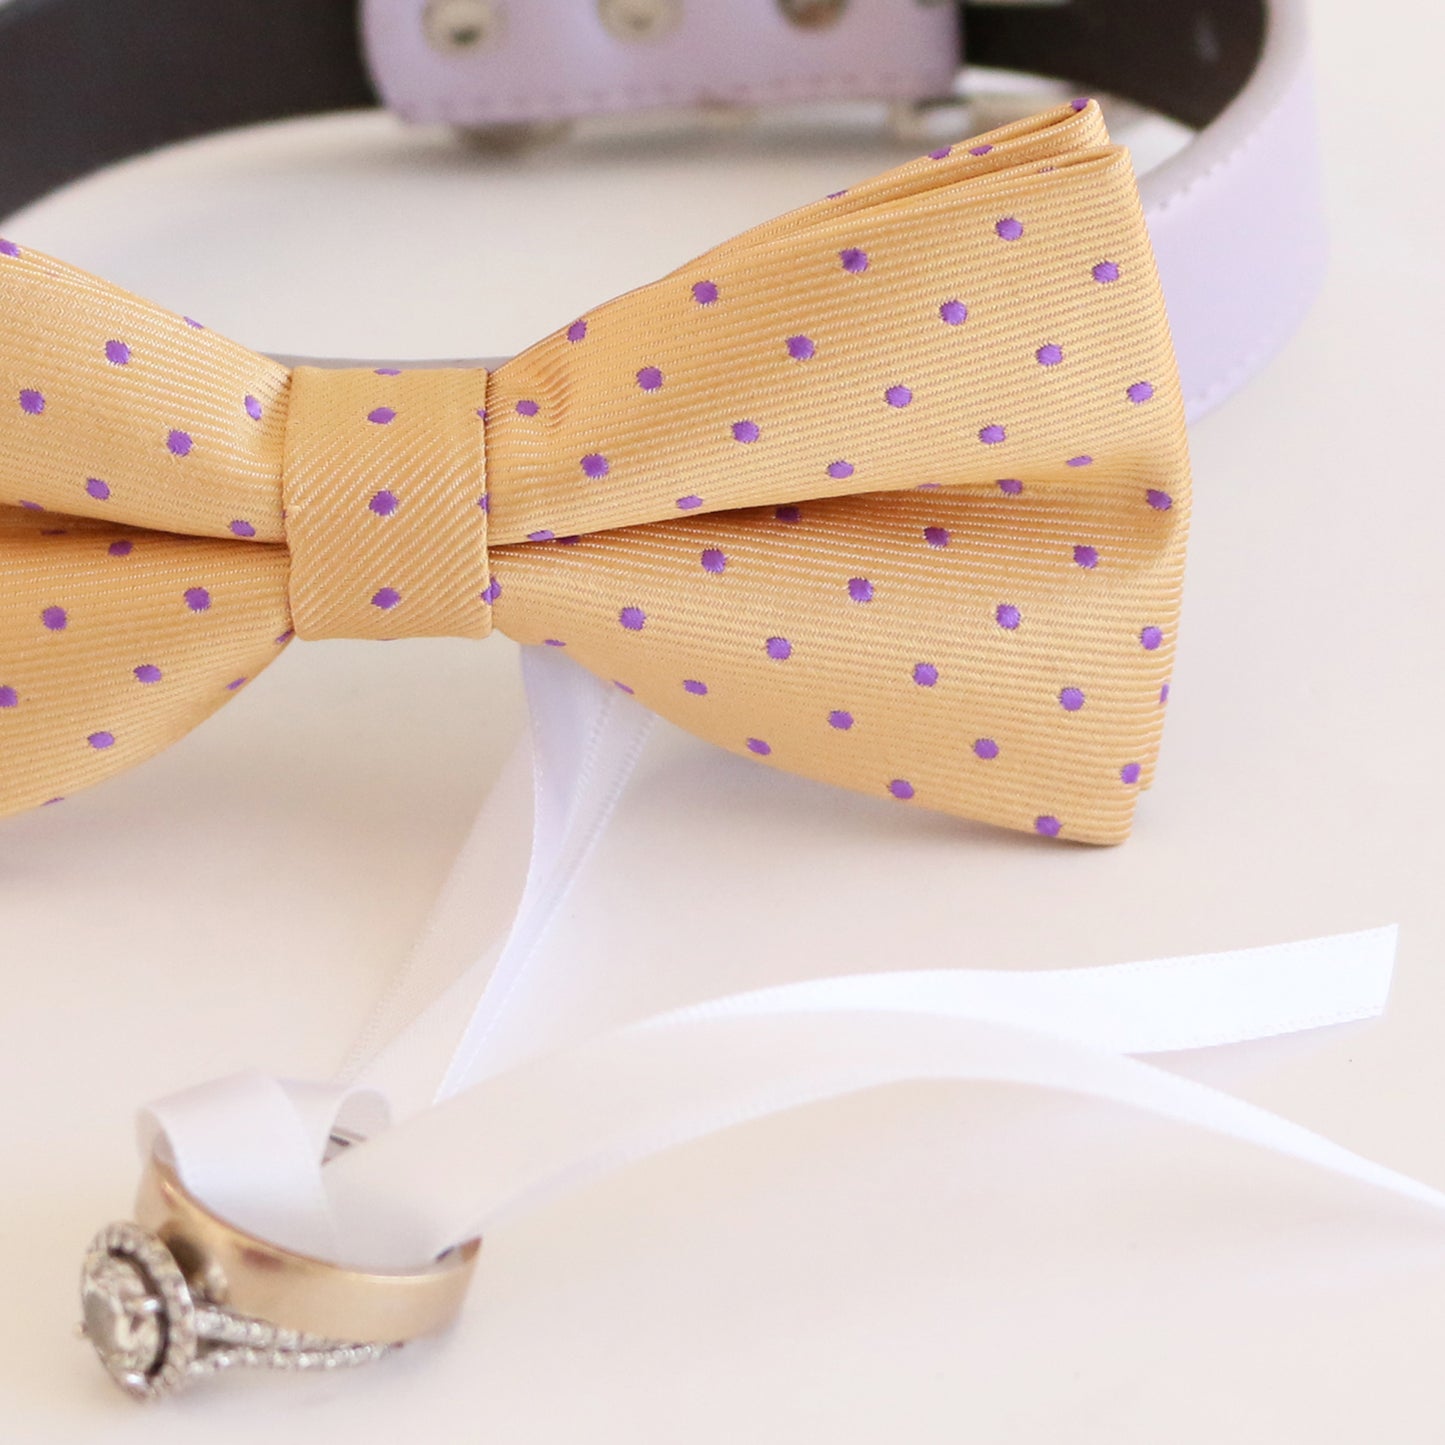 Cream lavender bow tie collar Leather collar Dog ring bearer ring bearer bow tie adjustable handmade XS to XXL collar and bow Proposal , Wedding dog collar